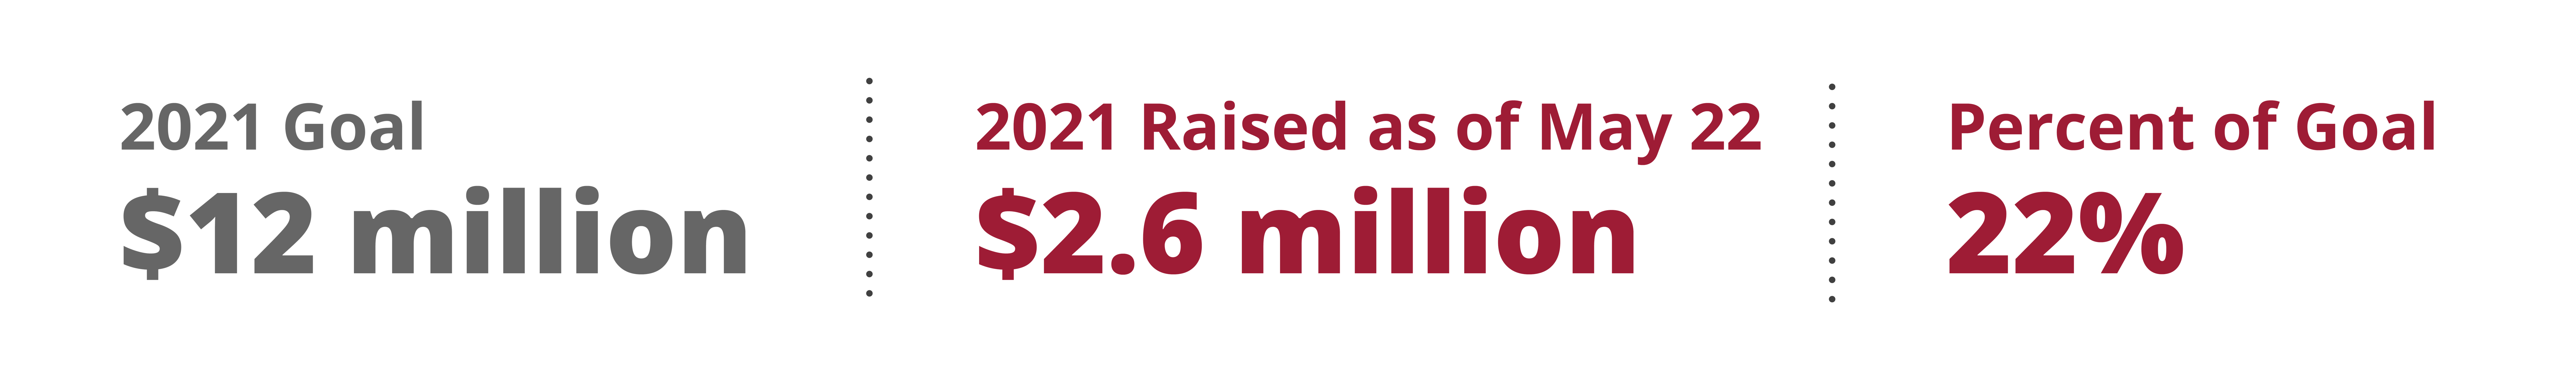 Our 2021 fundraising goal is to raise 12 million dollars. As of May 22nd, we've raised 2.5 million dollars, or 22% of our goal.